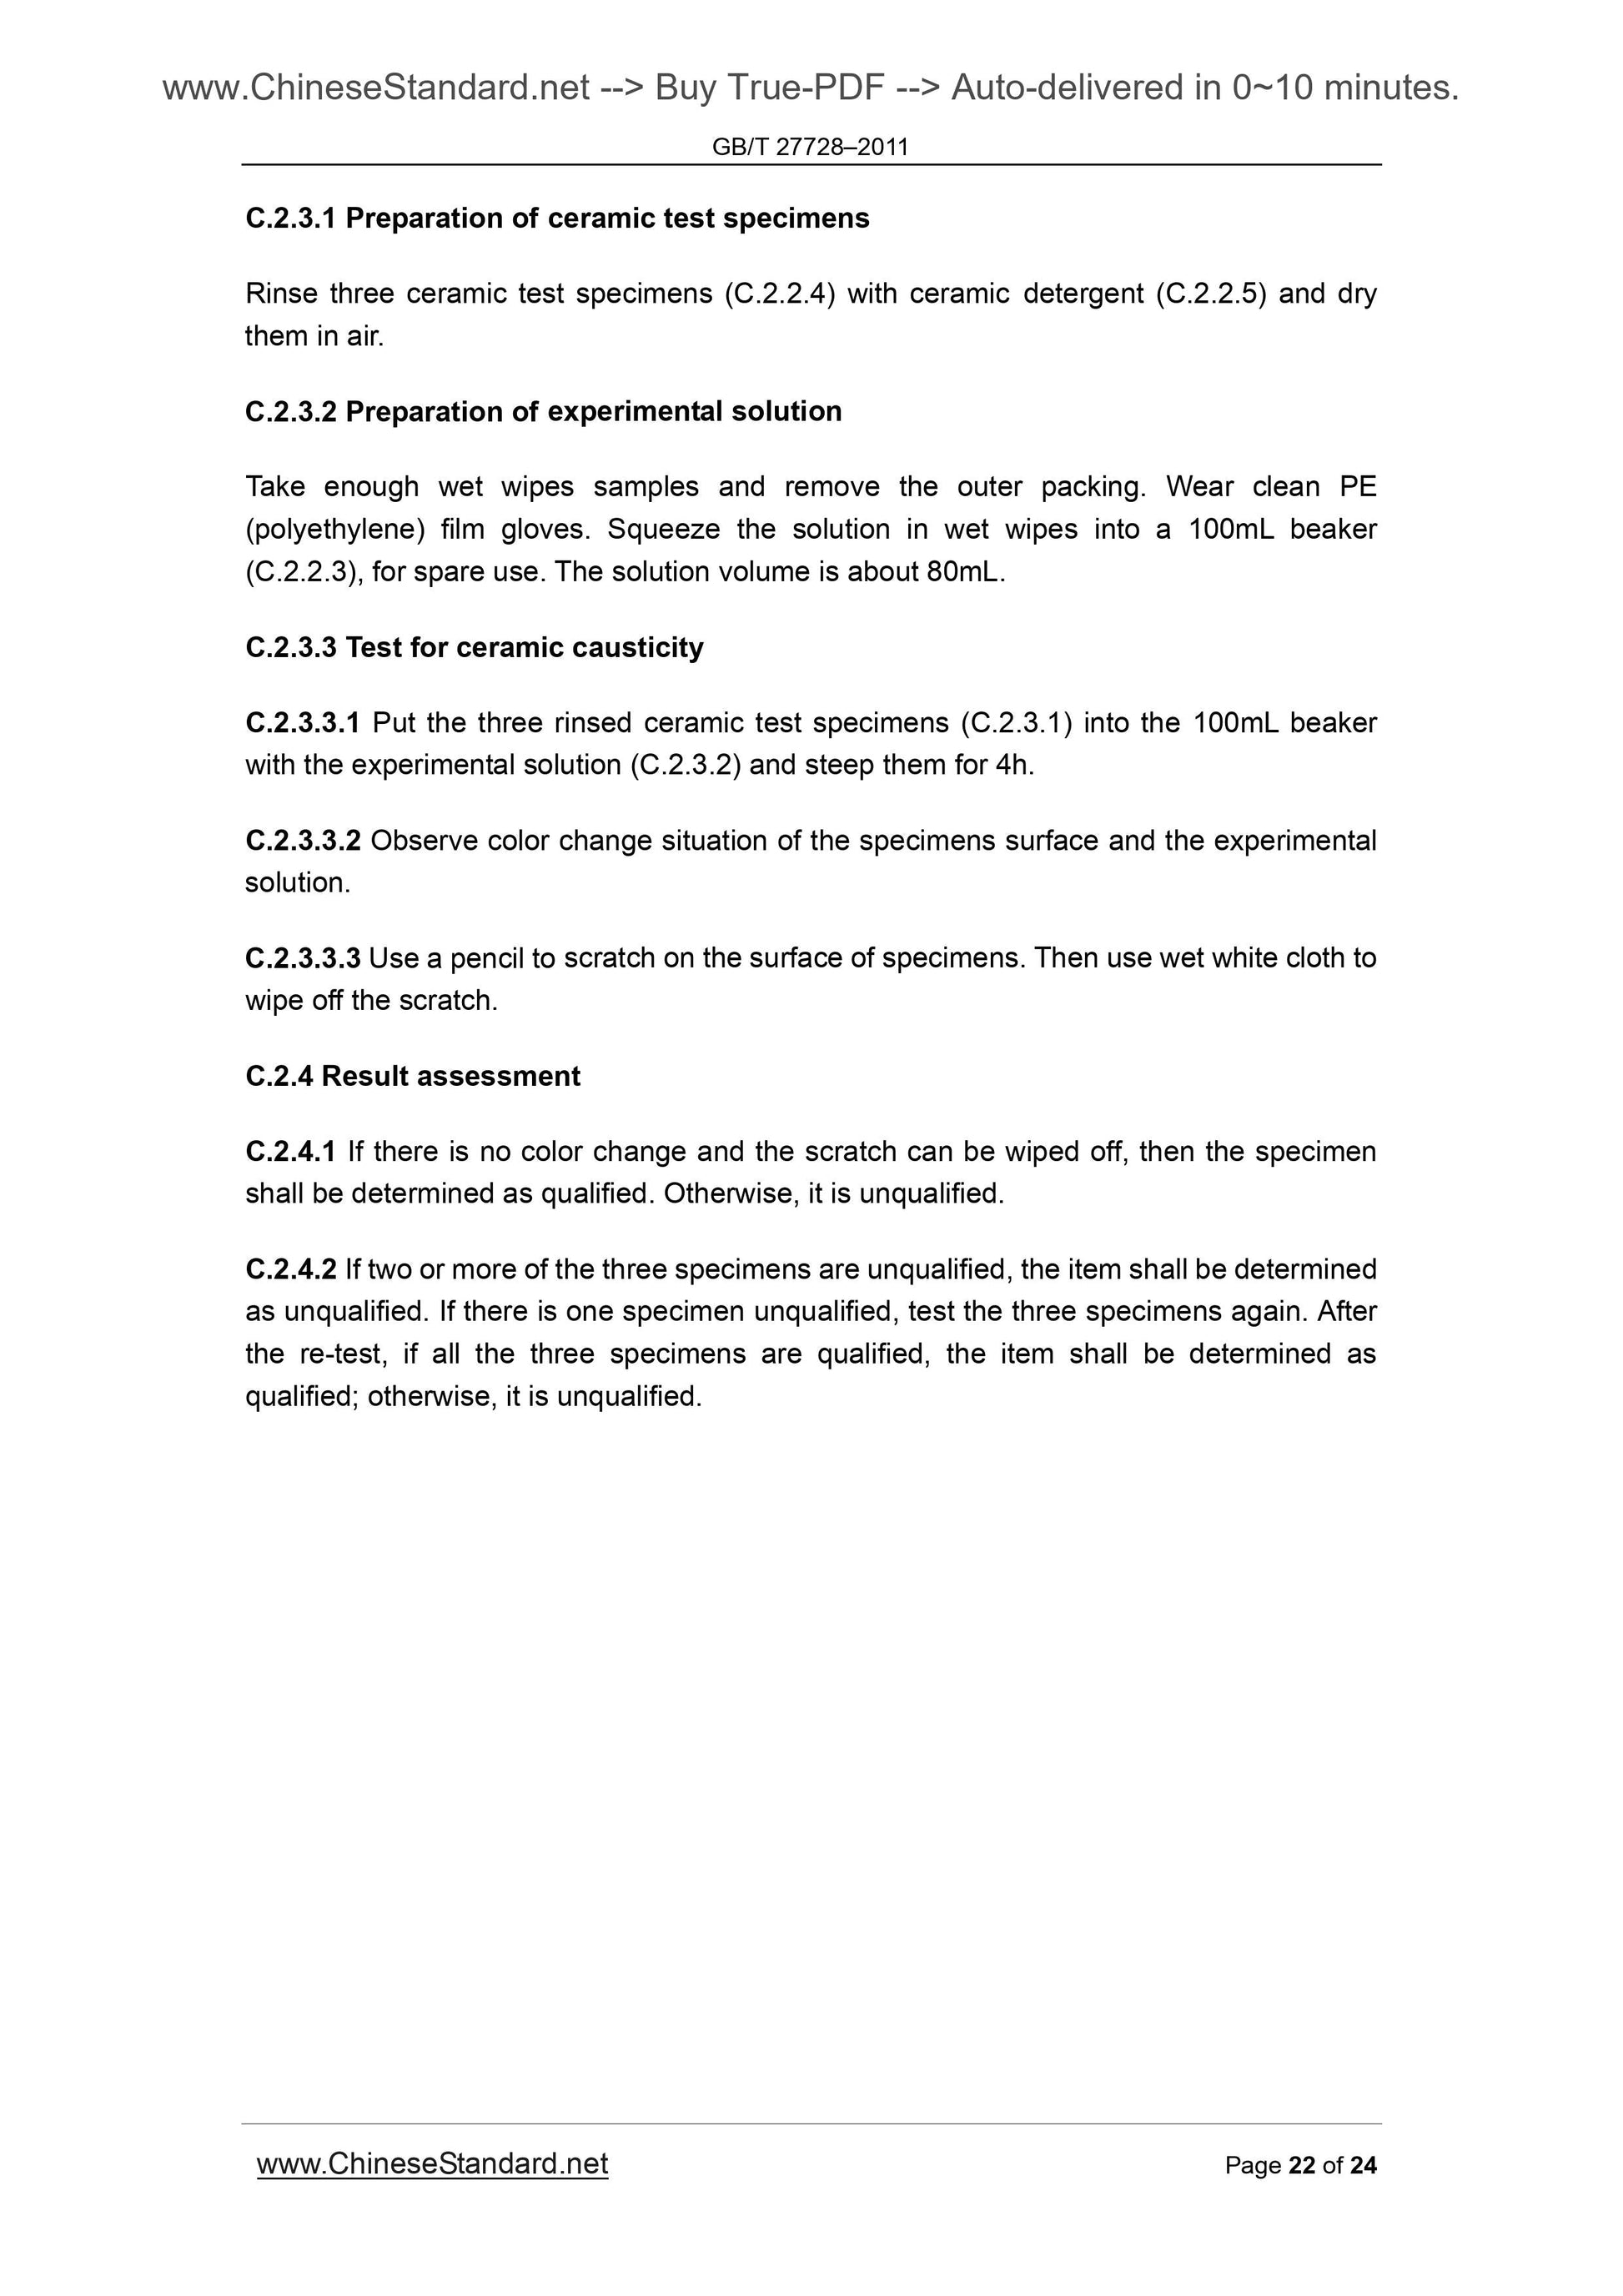 GB/T 27728-2011 Page 9